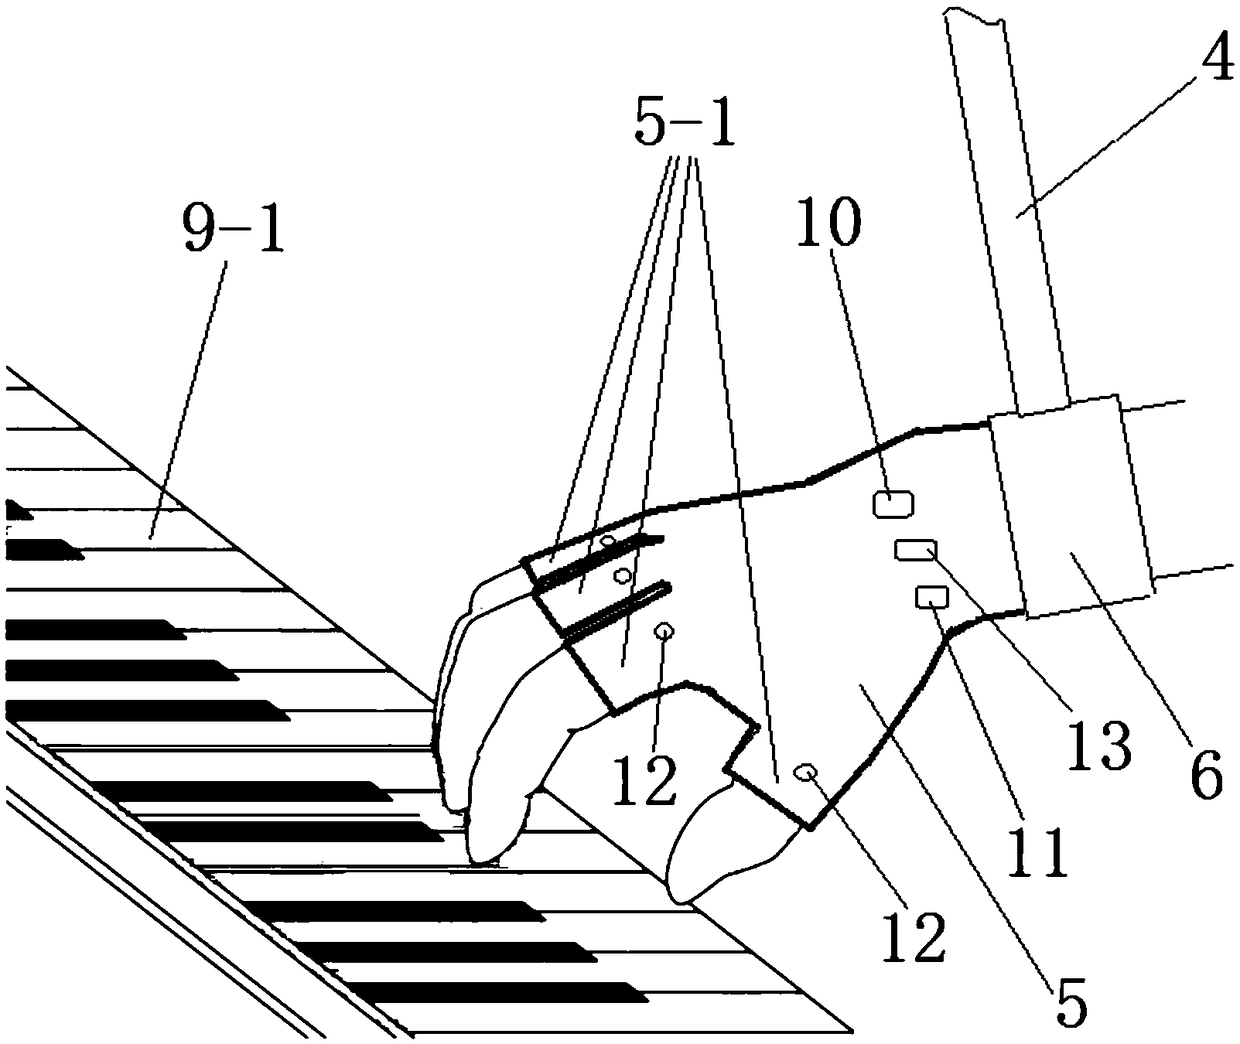 Auxiliary piano teaching device